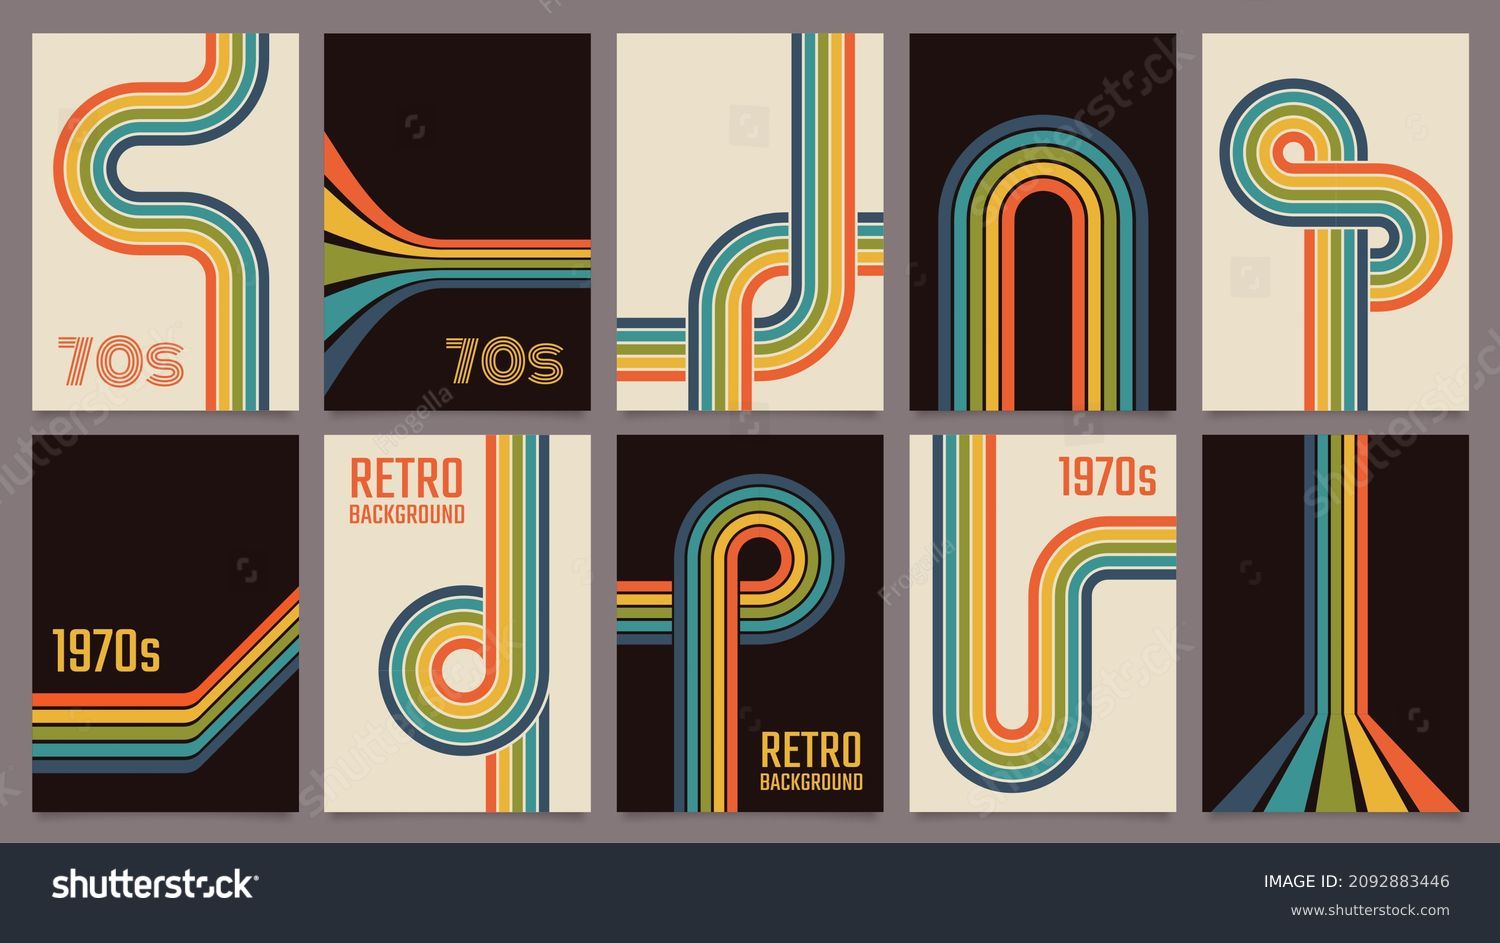 SVG of Retro 70s geometric posters, vintage rainbow color lines print. Groovy striped design poster, abstract 1970s colorful background vector set. Minimalistic old-fashioned cover for artwork svg